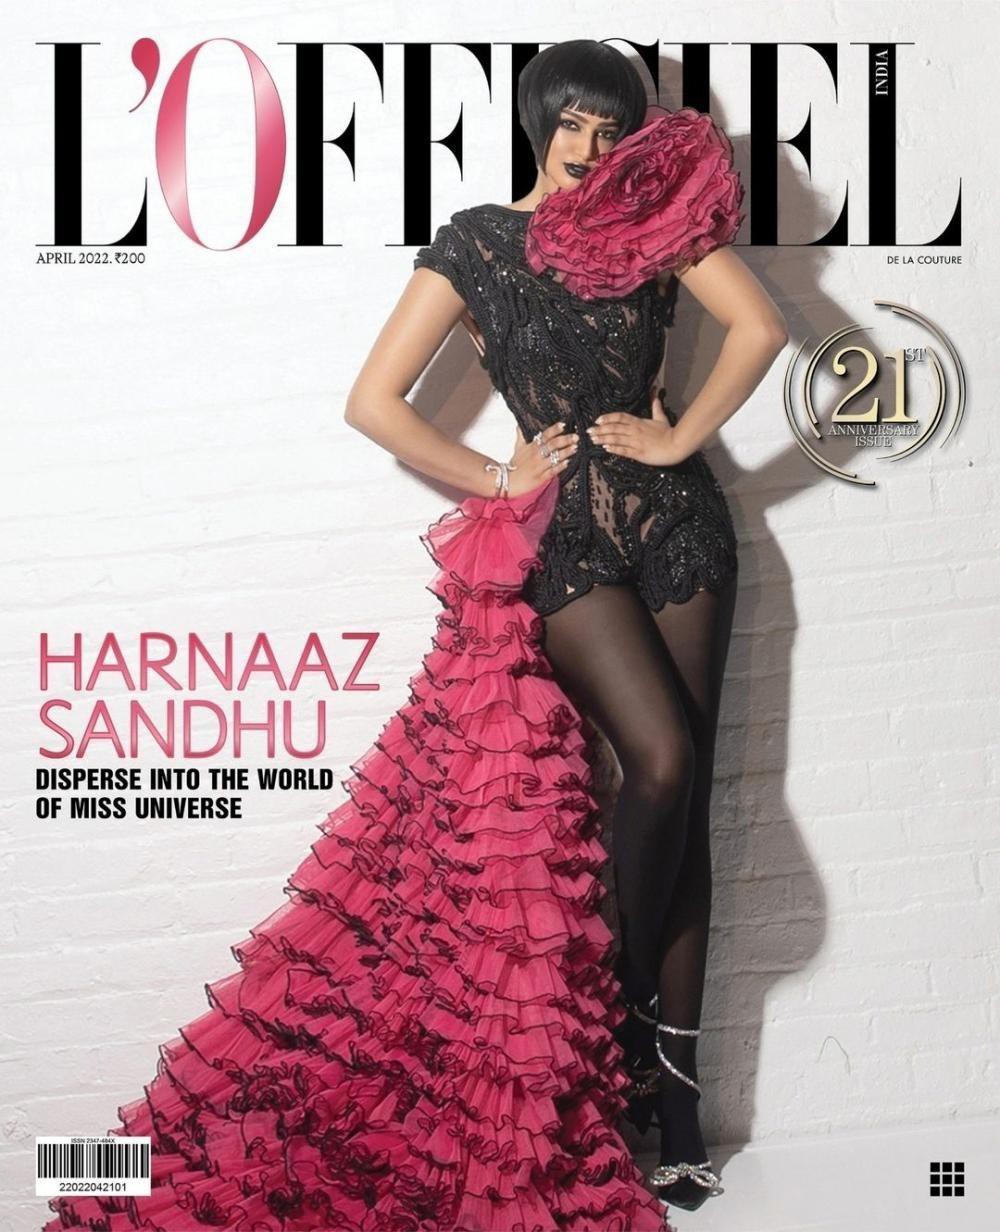 Wearing the dress of Miss Universe Harnaaz Sandhu, Thanh Hang showed off her sexy 1m12 long legs - Photo 7.